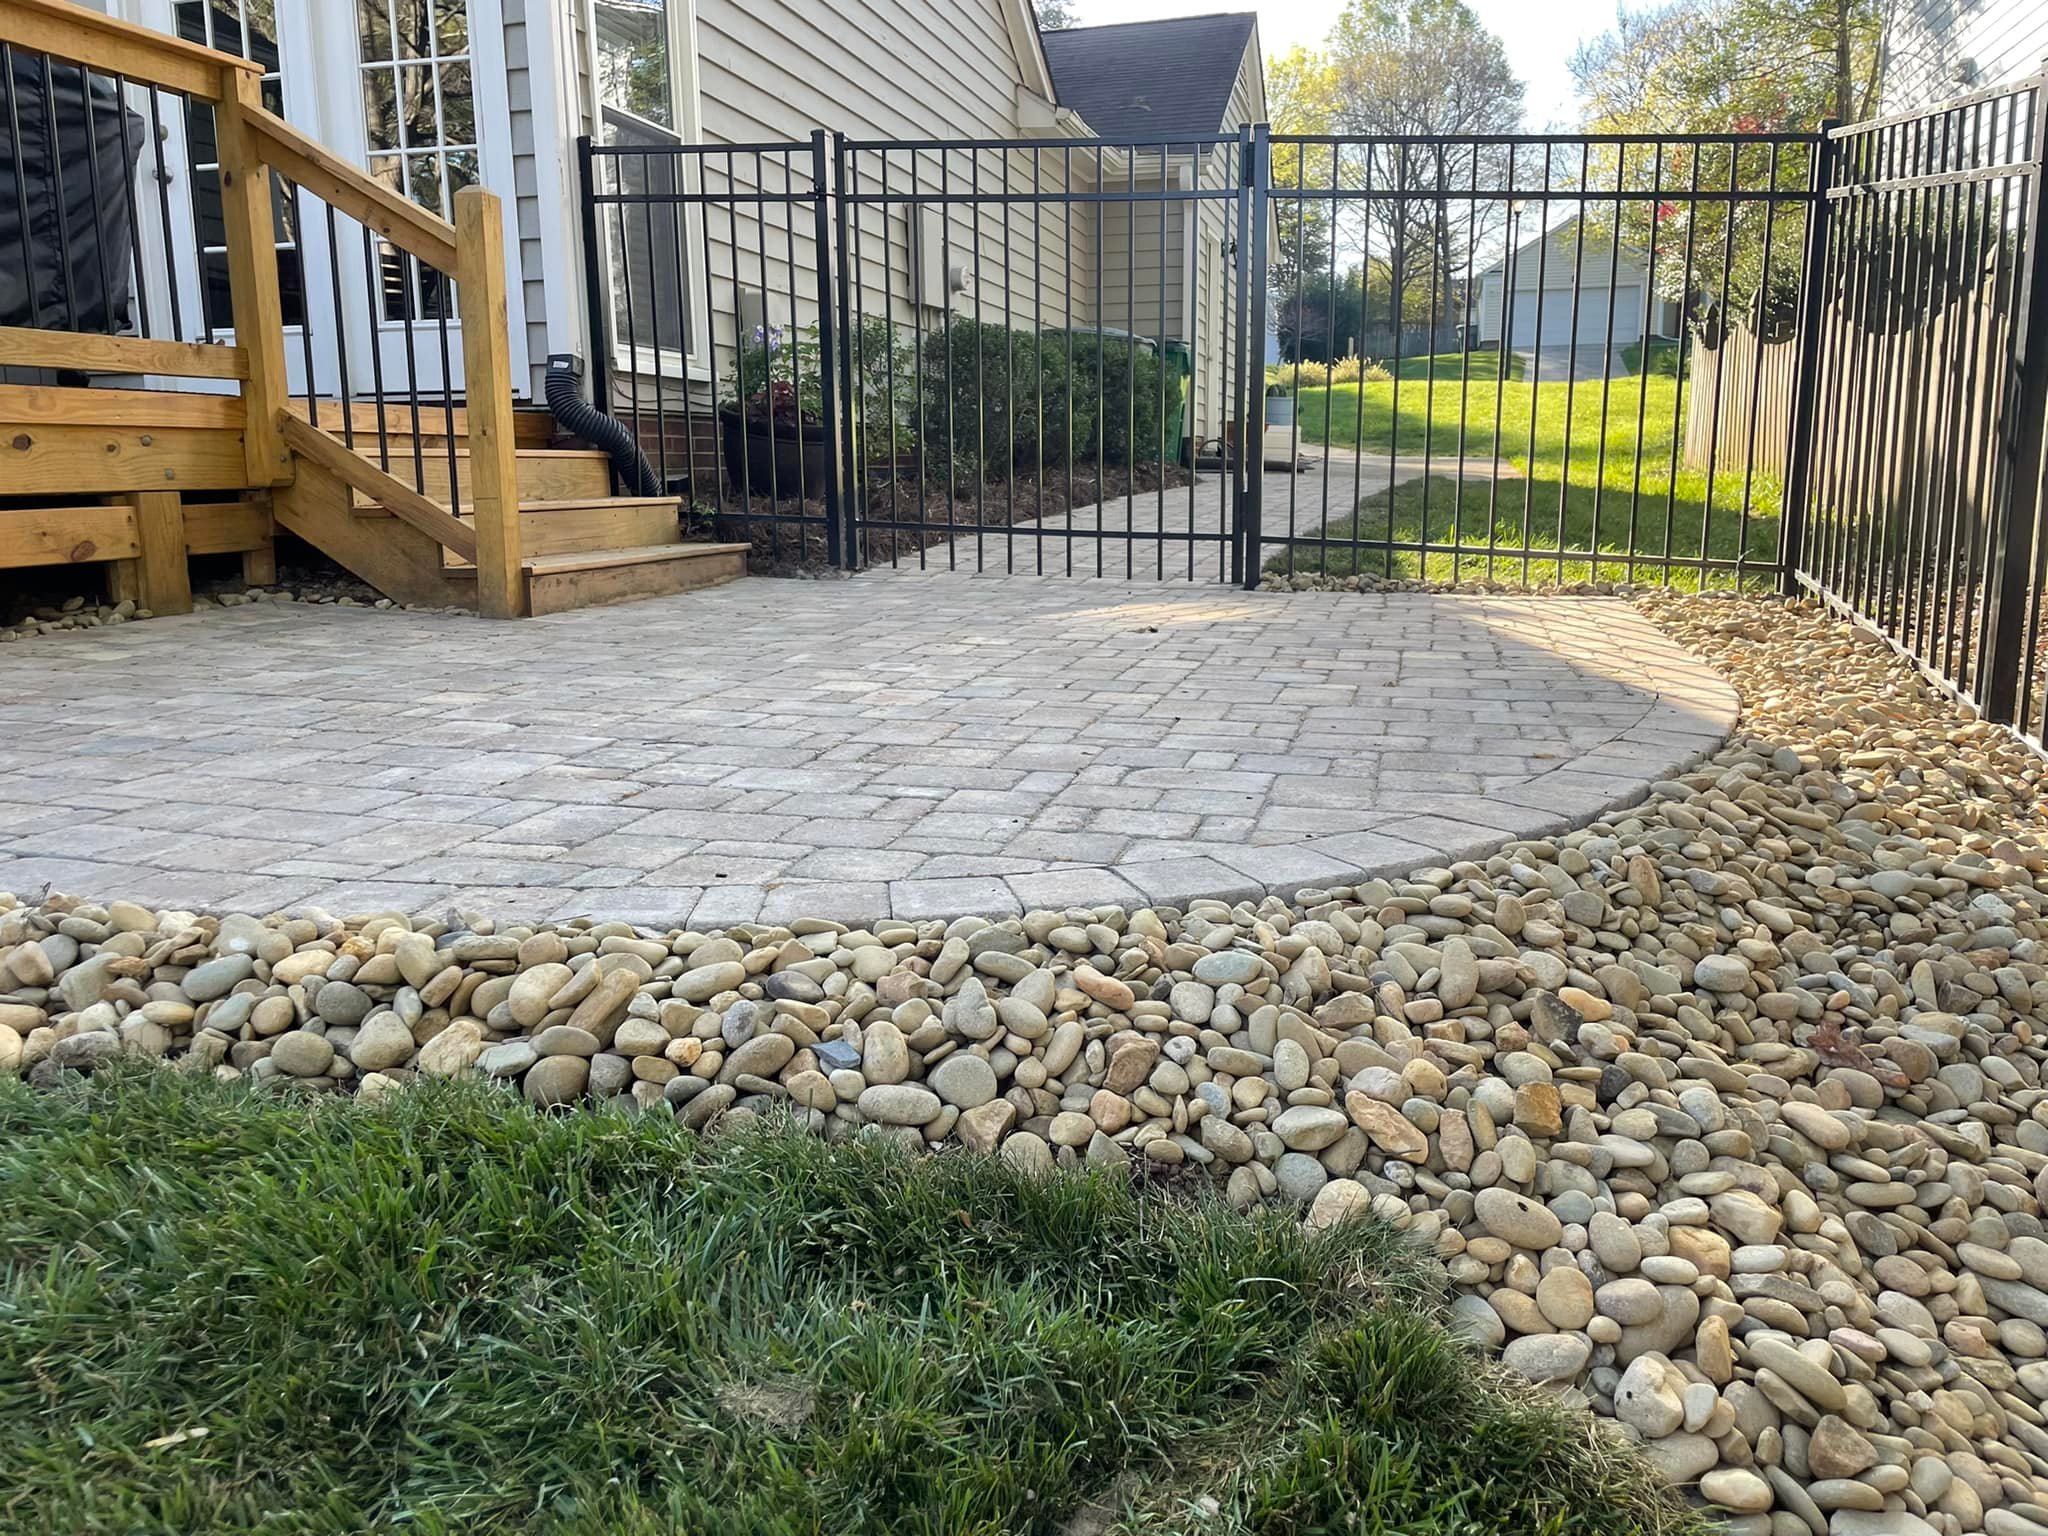 Paver Patios – Outdoor Living Tip of the Day